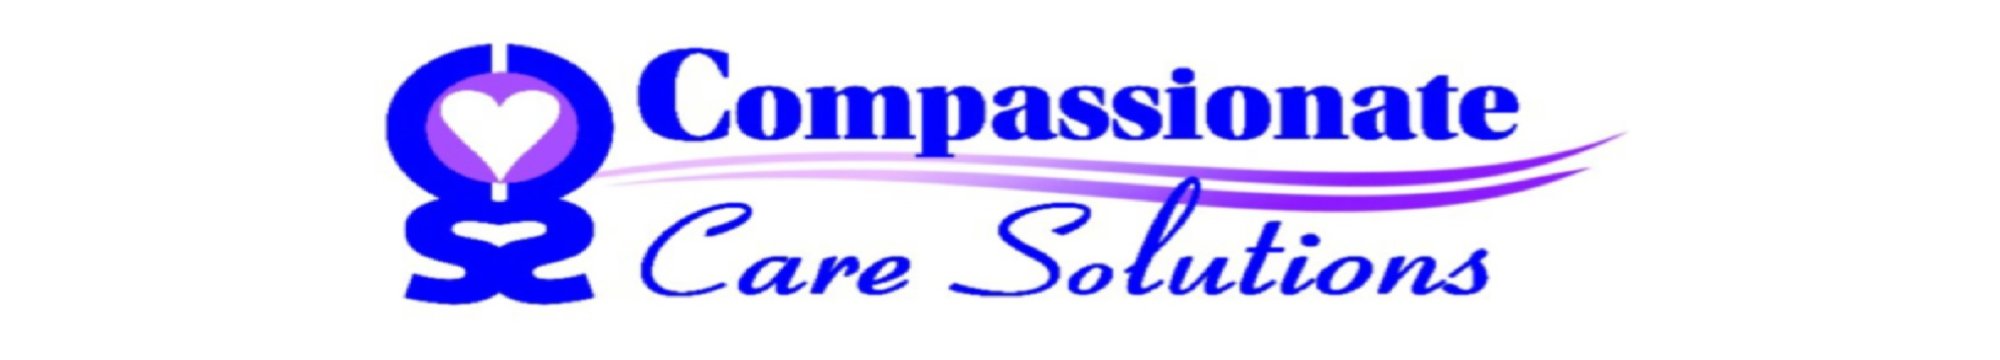 Compassionate Care Solutions